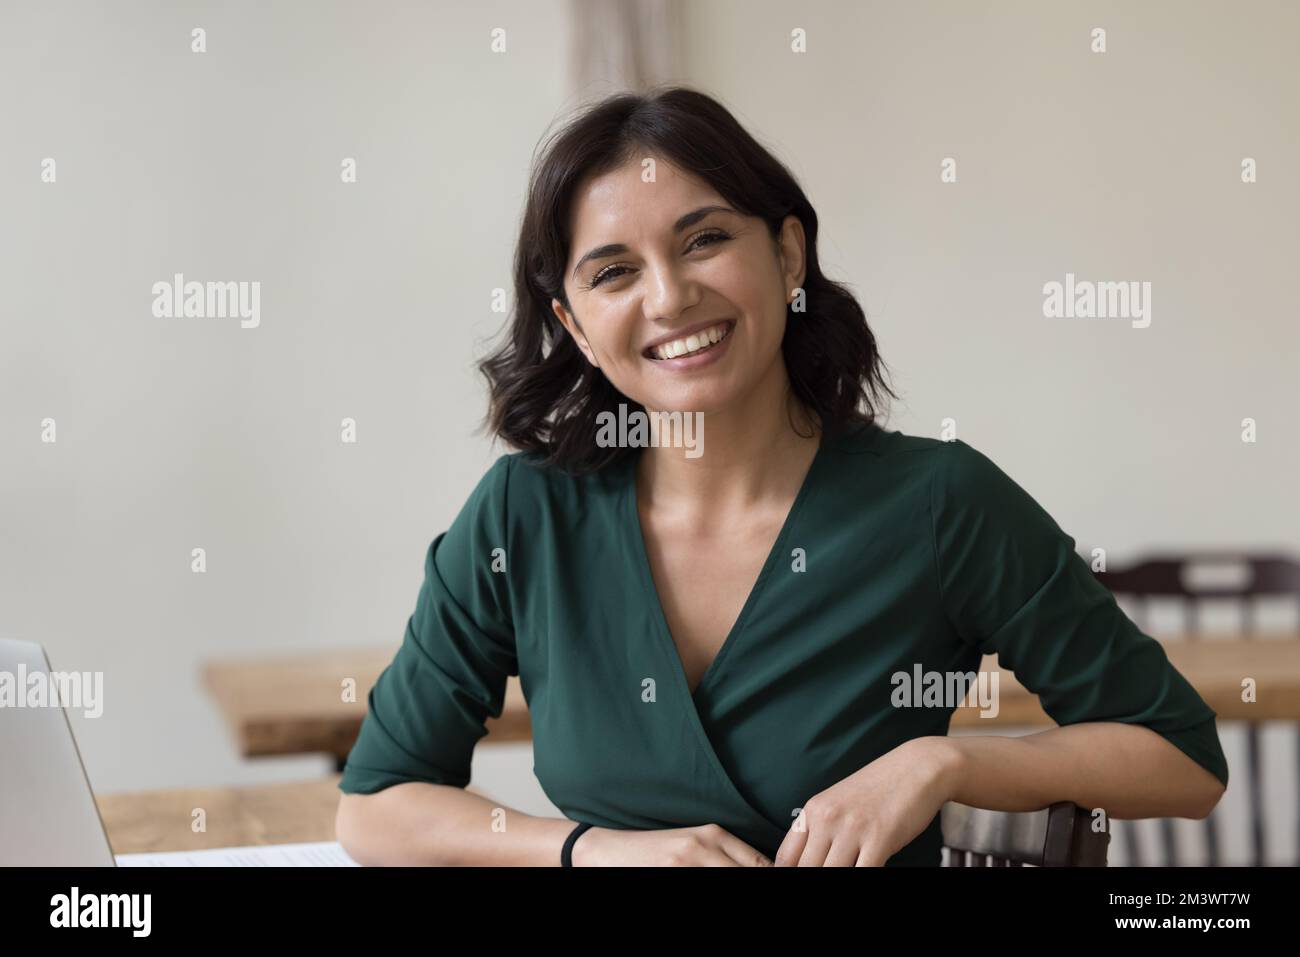 Happy successful business woman sitting at work table Stock Photo